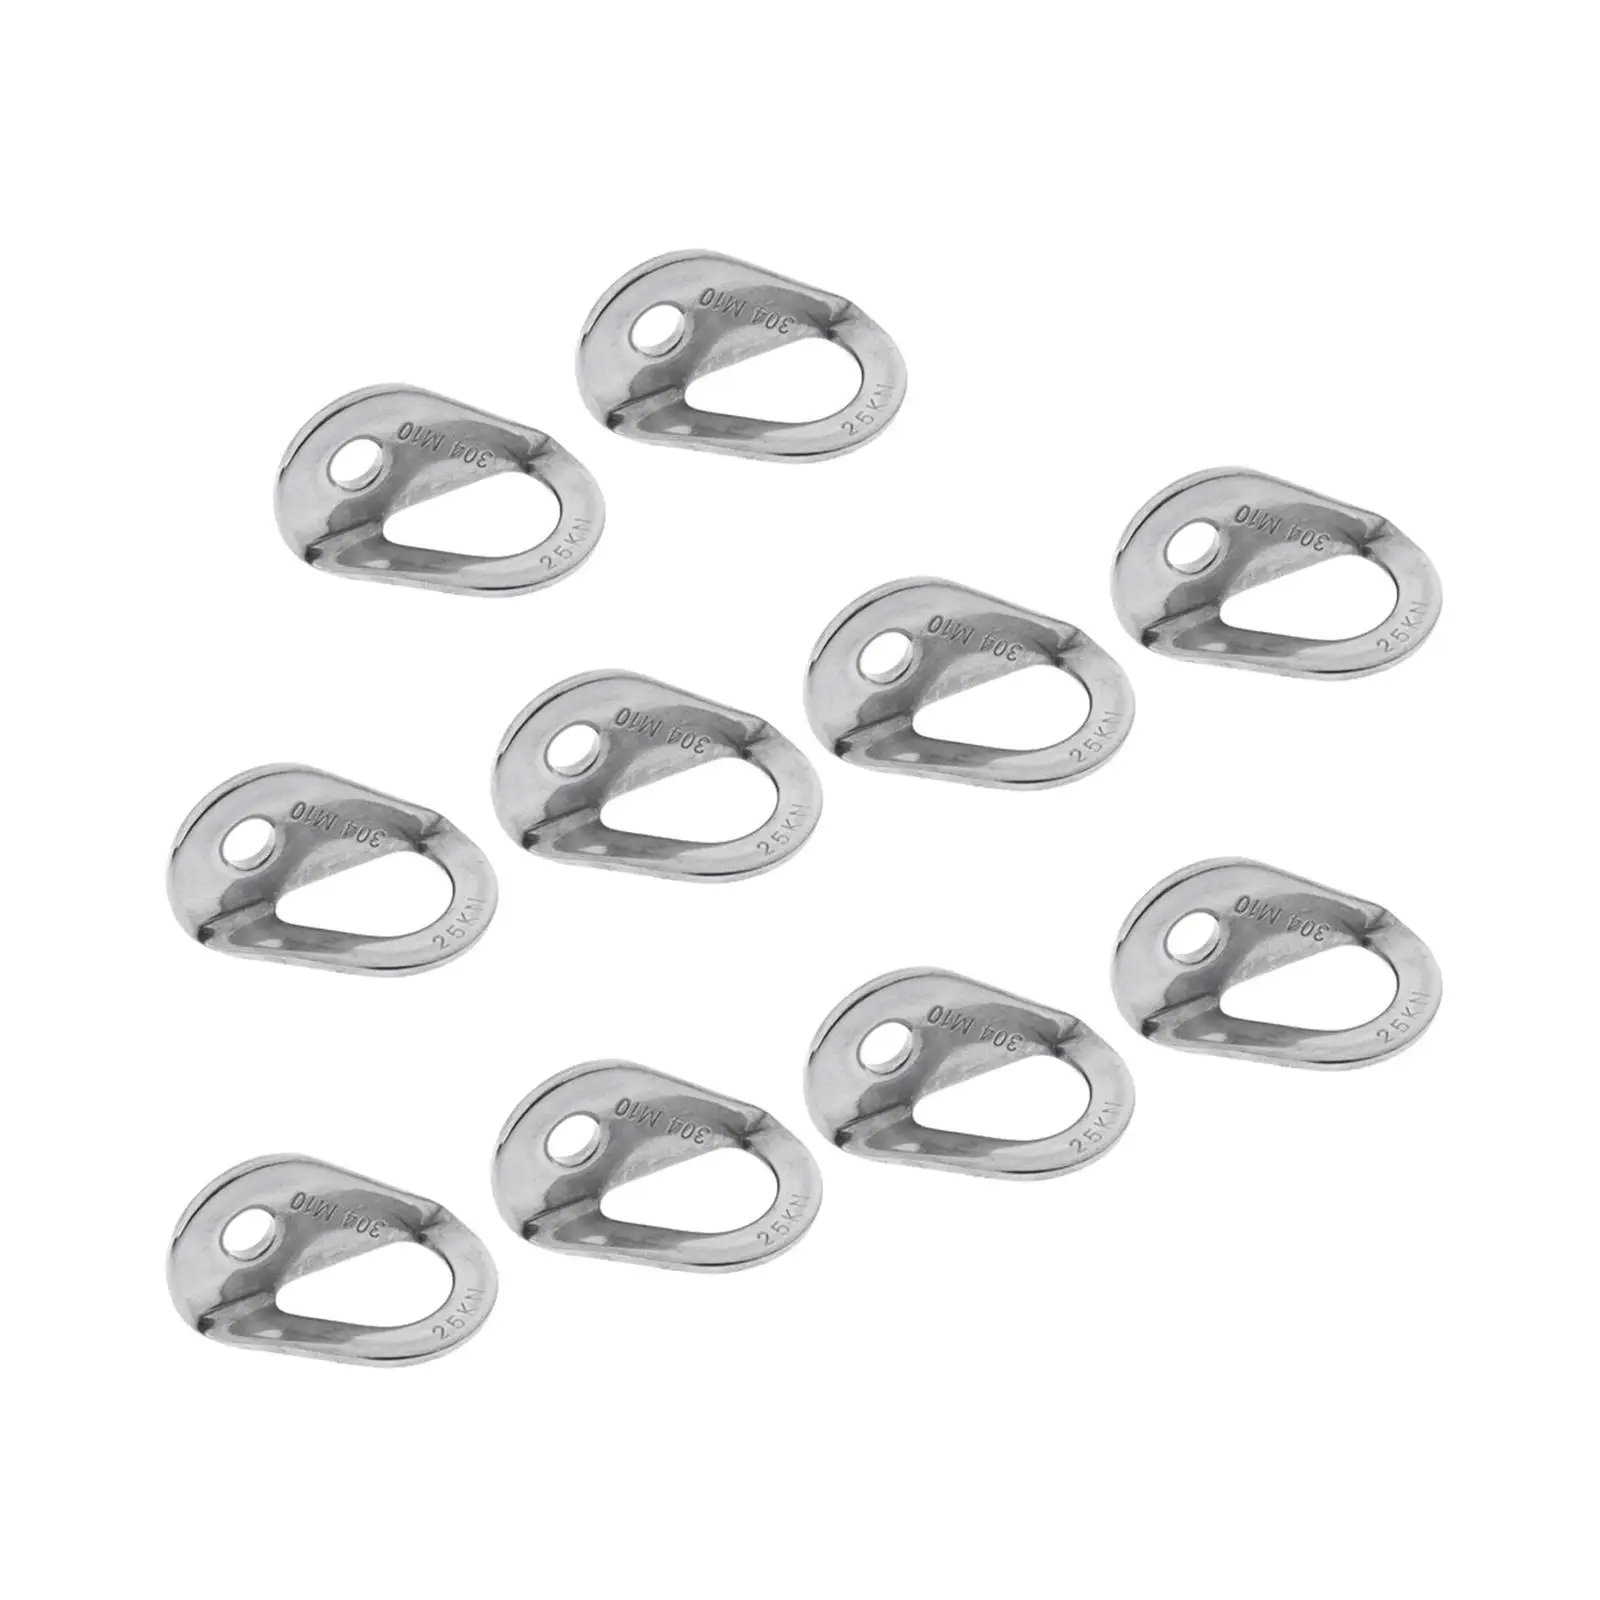 10x Climbing Anchor Bolt Hanger Anchor Protection 10mm Heavy Duty Expansion Nail Bolt Hanger for Travel Outdoor Rappelling Piton